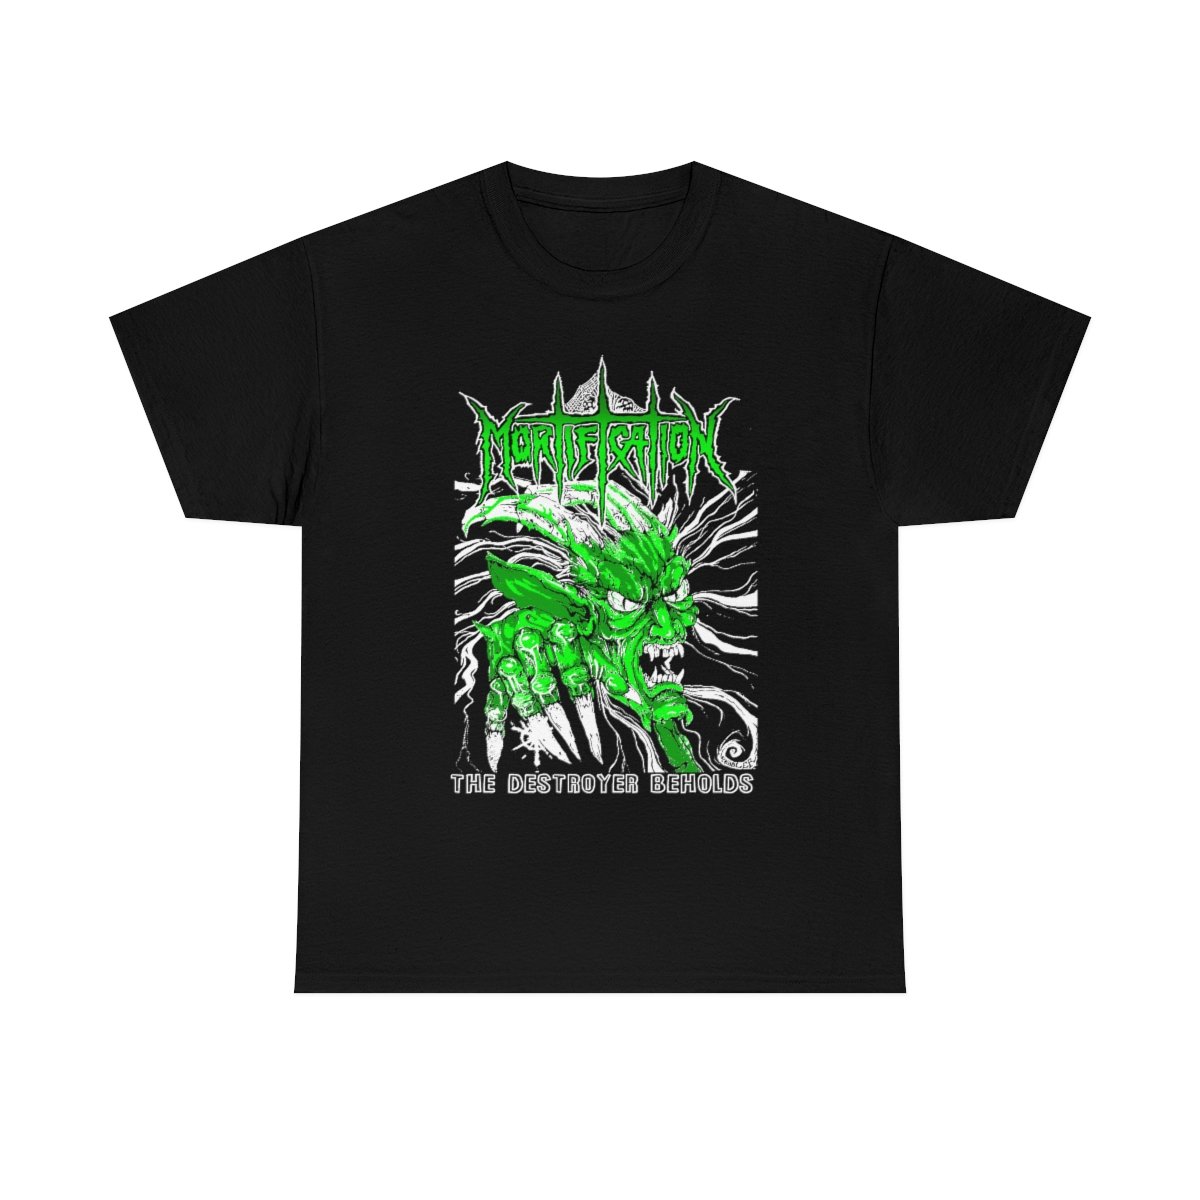 Mortification The Destroyer Beholds (Green) Short Sleeve Tshirt